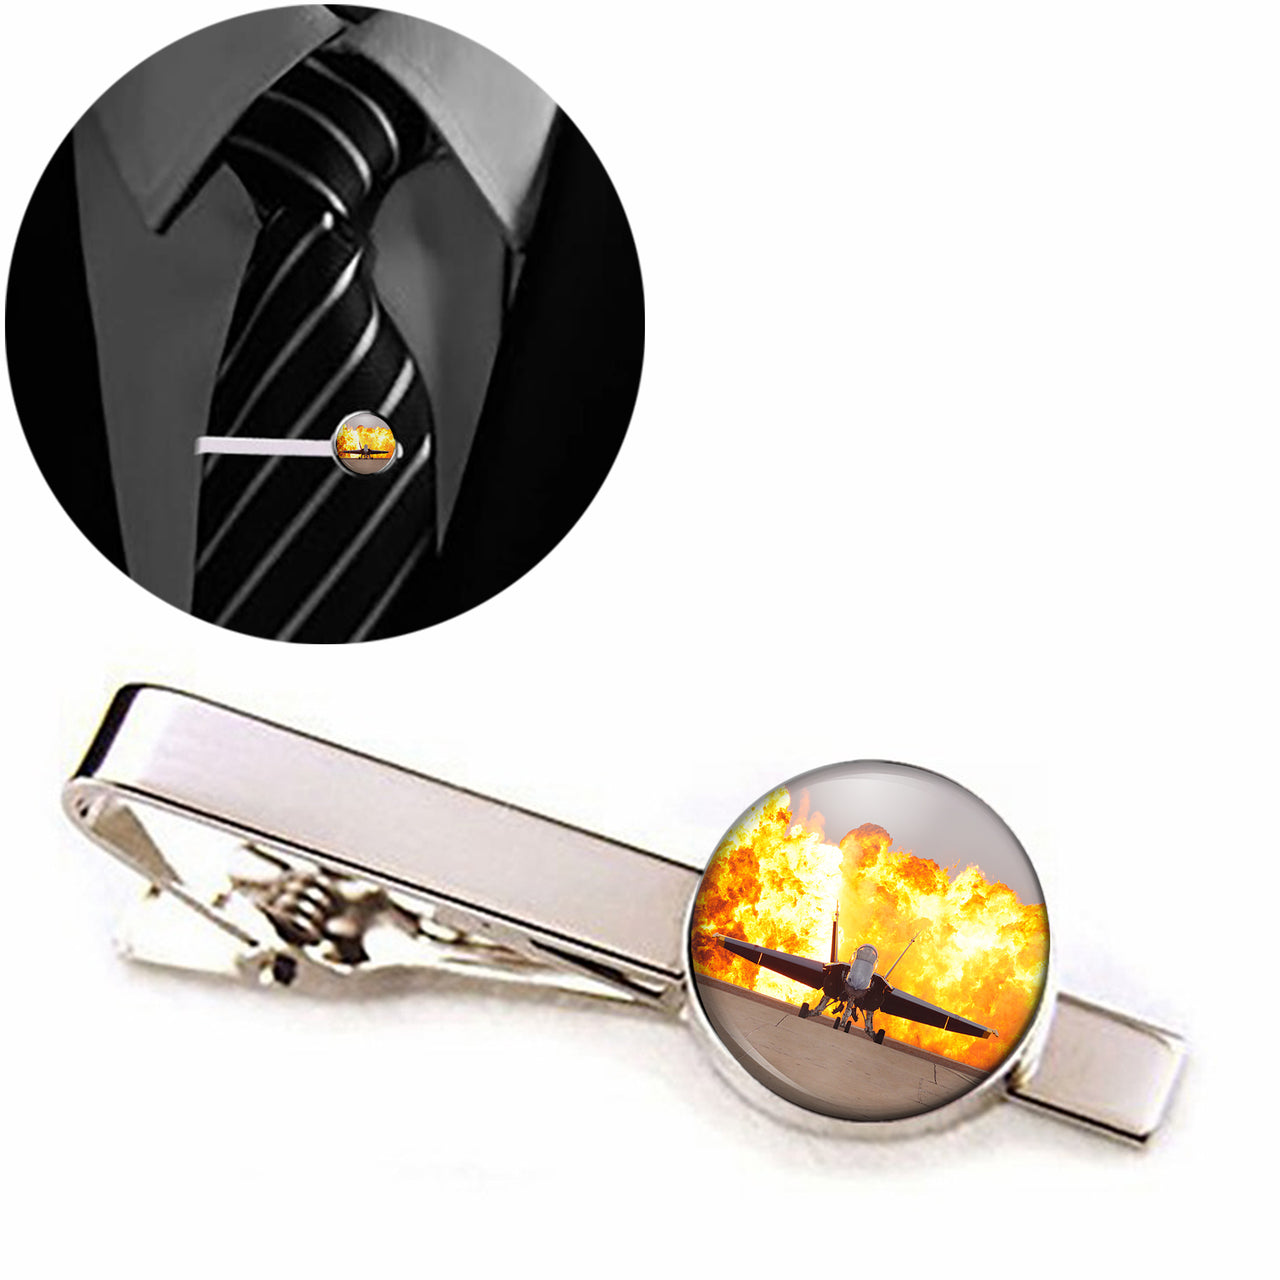 Face to Face with Air Force Jet & Flames Designed Tie Clips